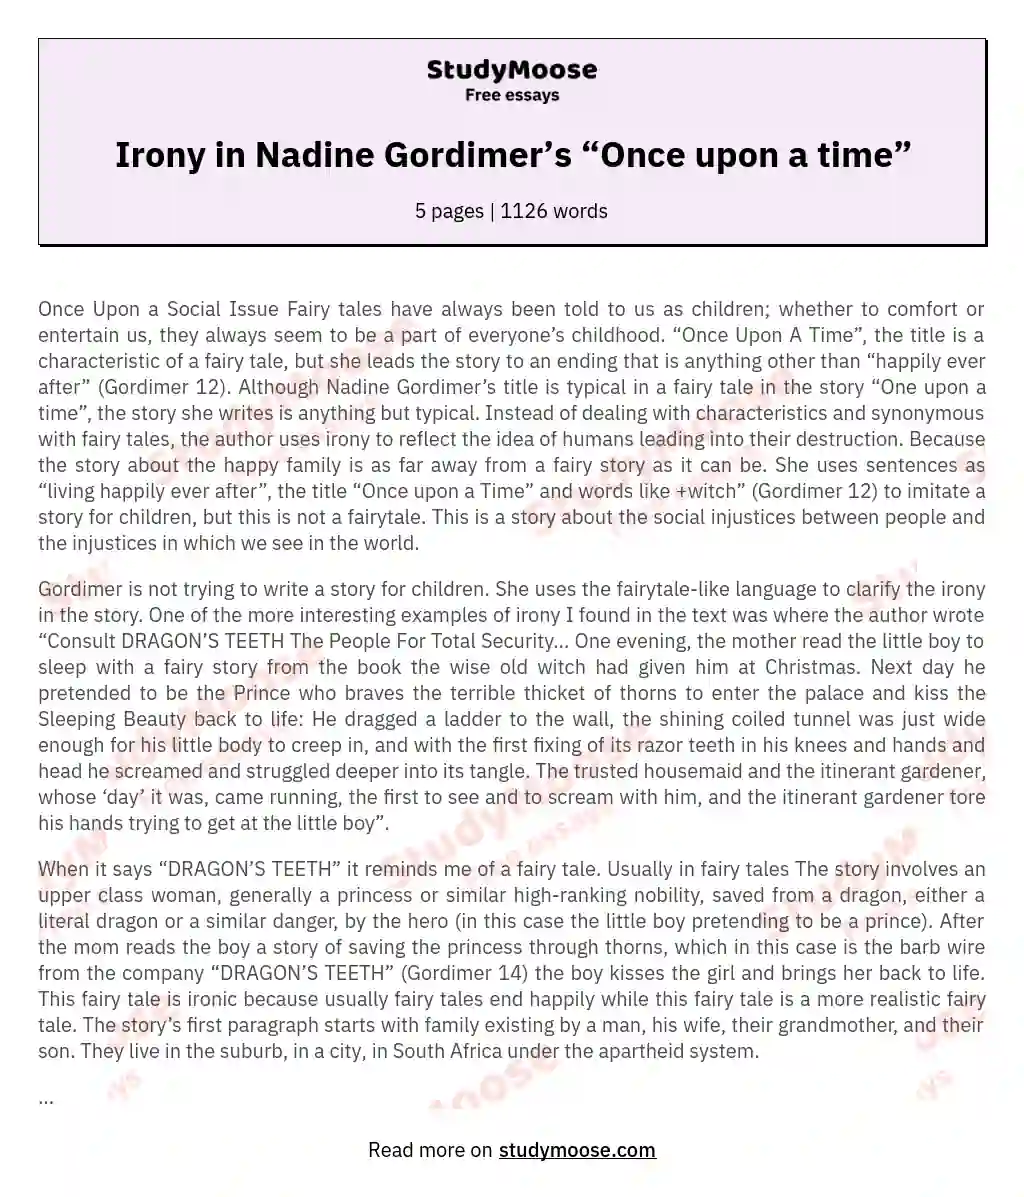 Irony in Nadine Gordimer’s “Once upon a time” essay